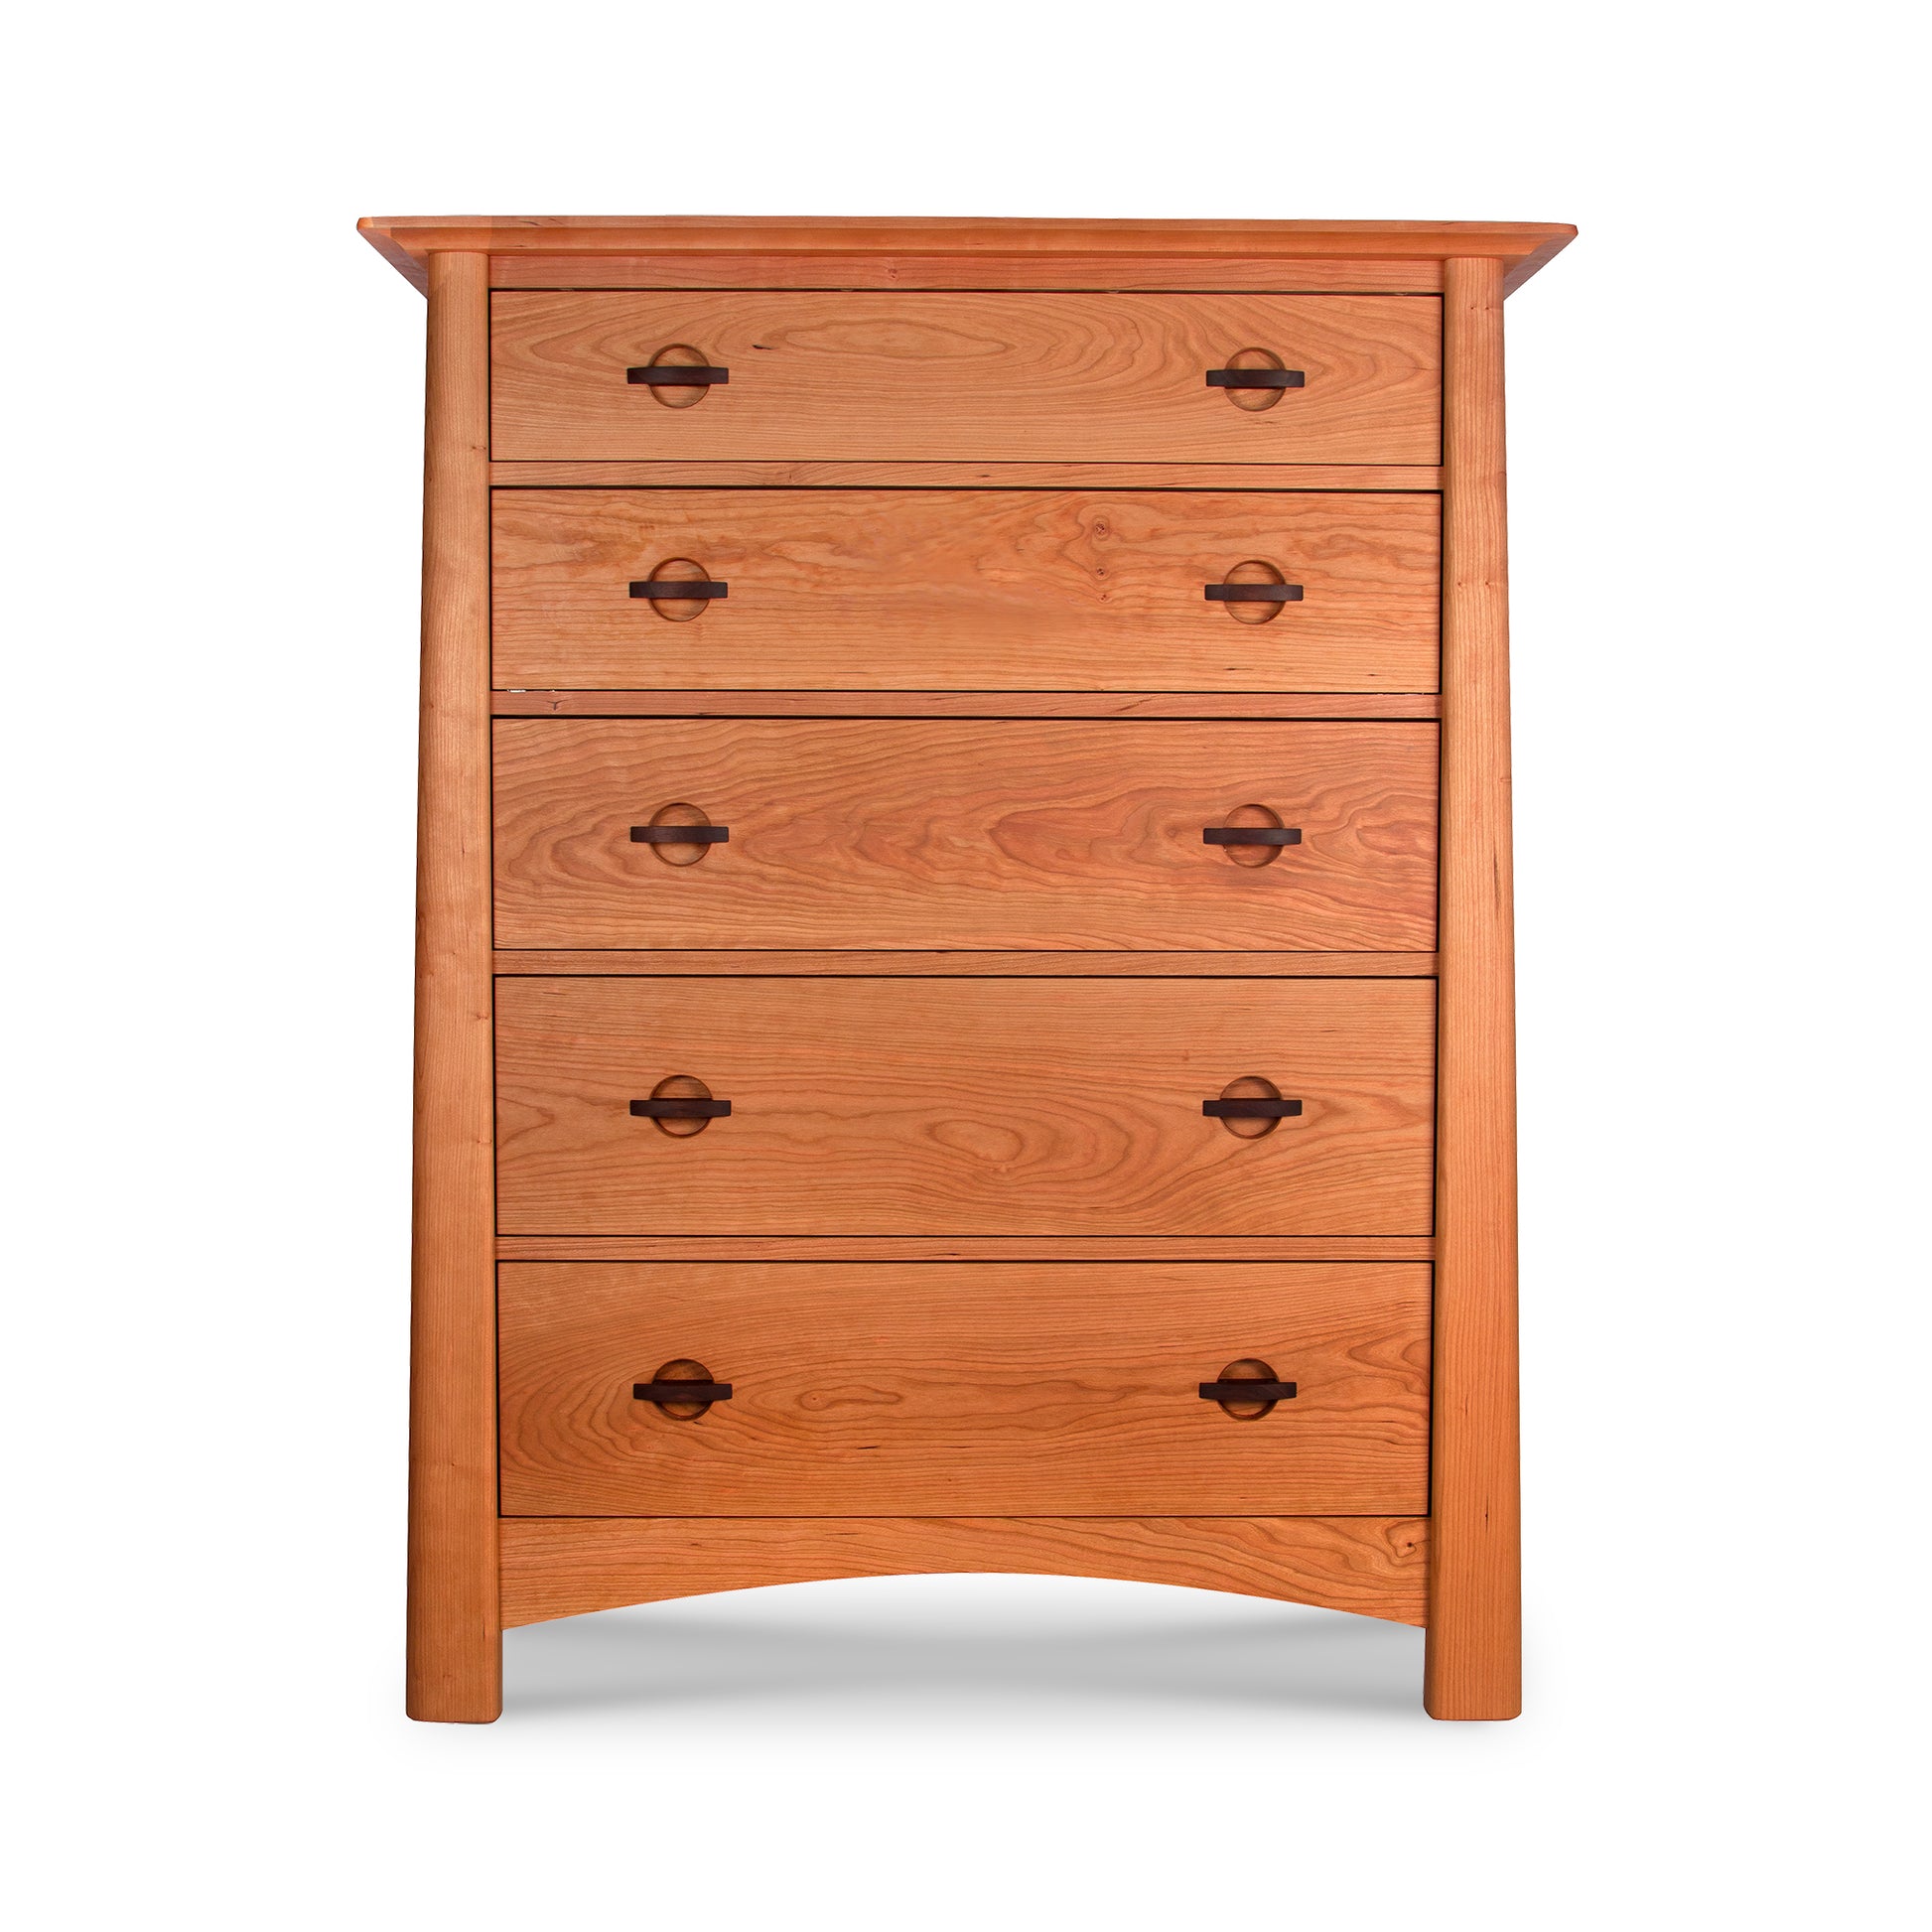 A wooden five-drawer dresser with round metal handles, isolated on a white background. The dresser features a Maple Corner Woodworks Cherry Moon 5-Drawer Chest design and a natural grain finish with Vermont craftsmanship.